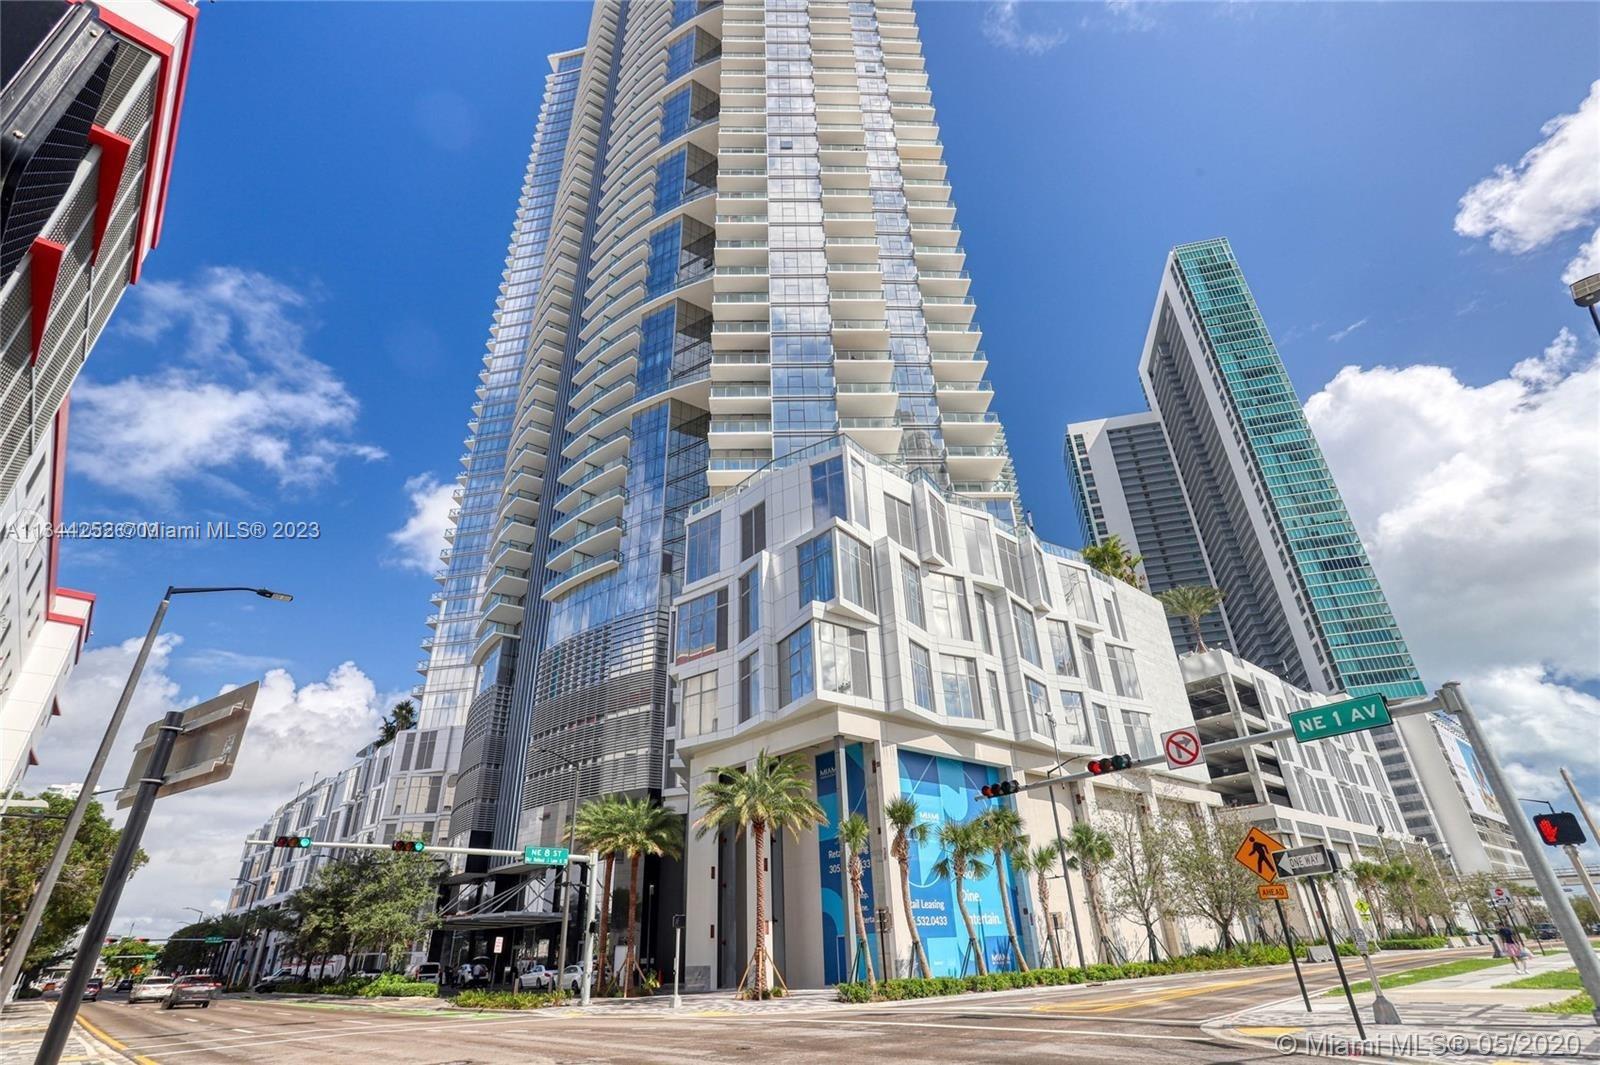 BEAUTIFUL and luxurious Condo in Paramount Miami World Center with Ocean views! The Condo has a priv